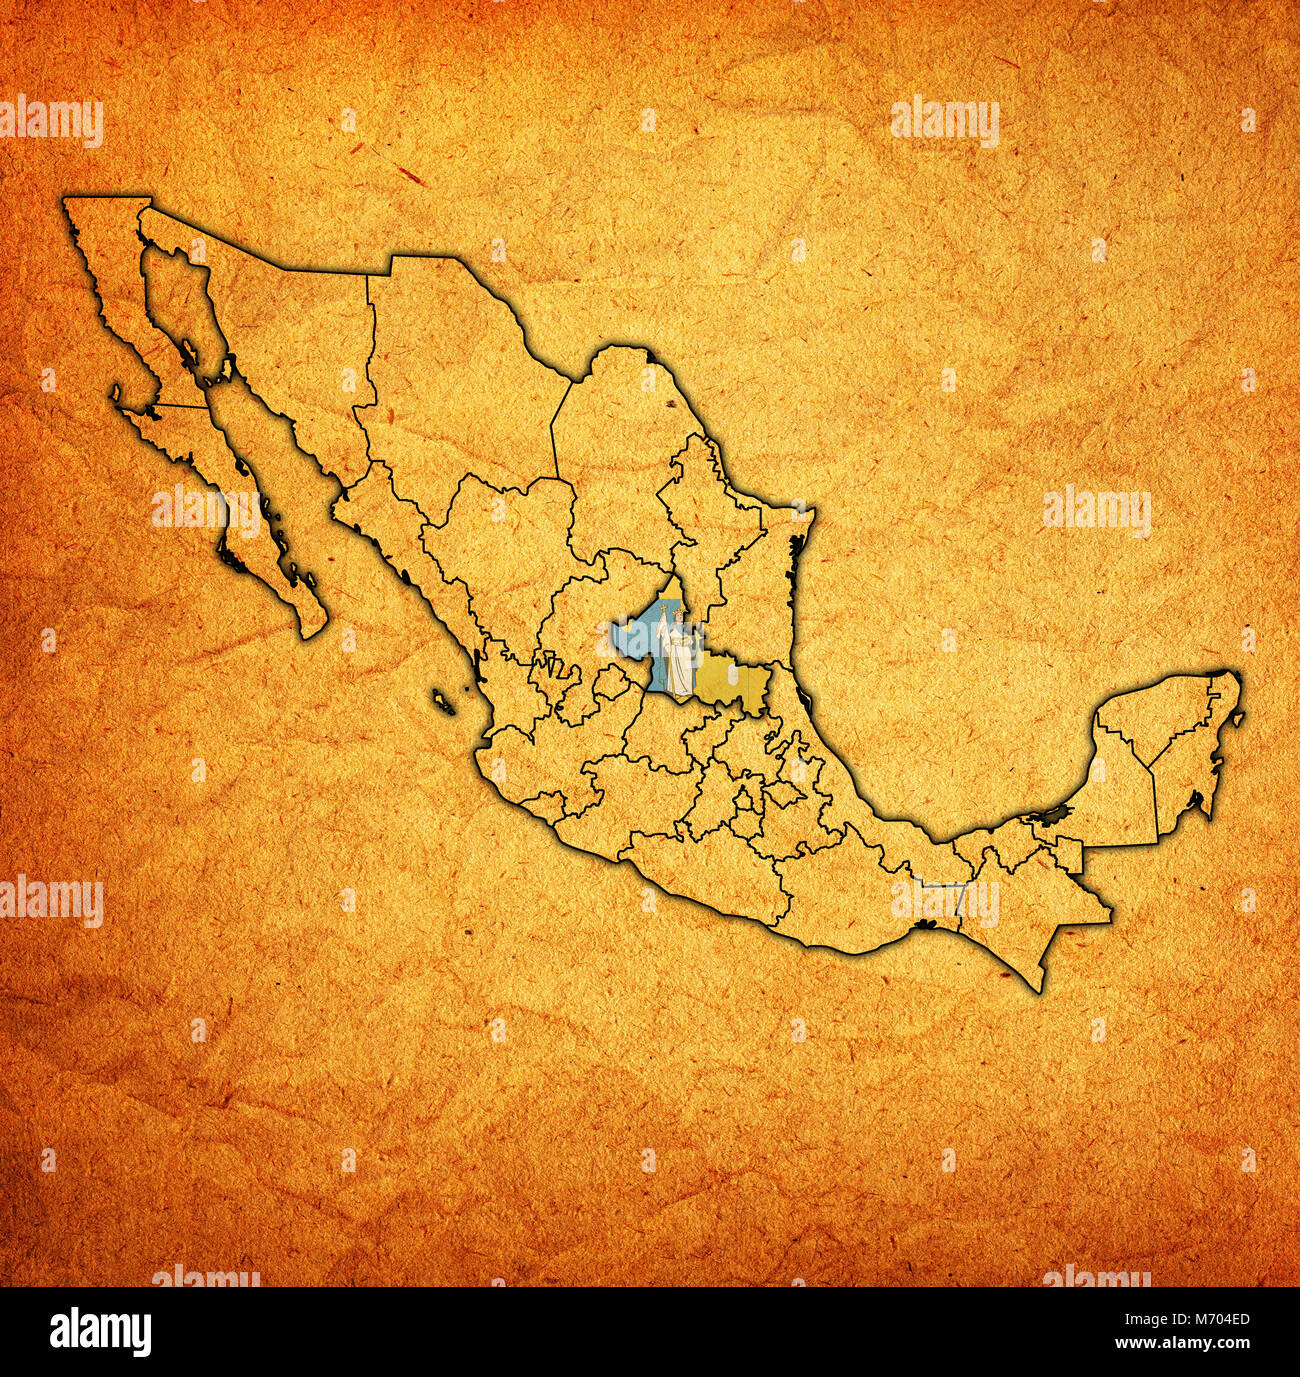 emblem of San Luis Potosi state on map with administrative divisions and borders of Mexico Stock Photo